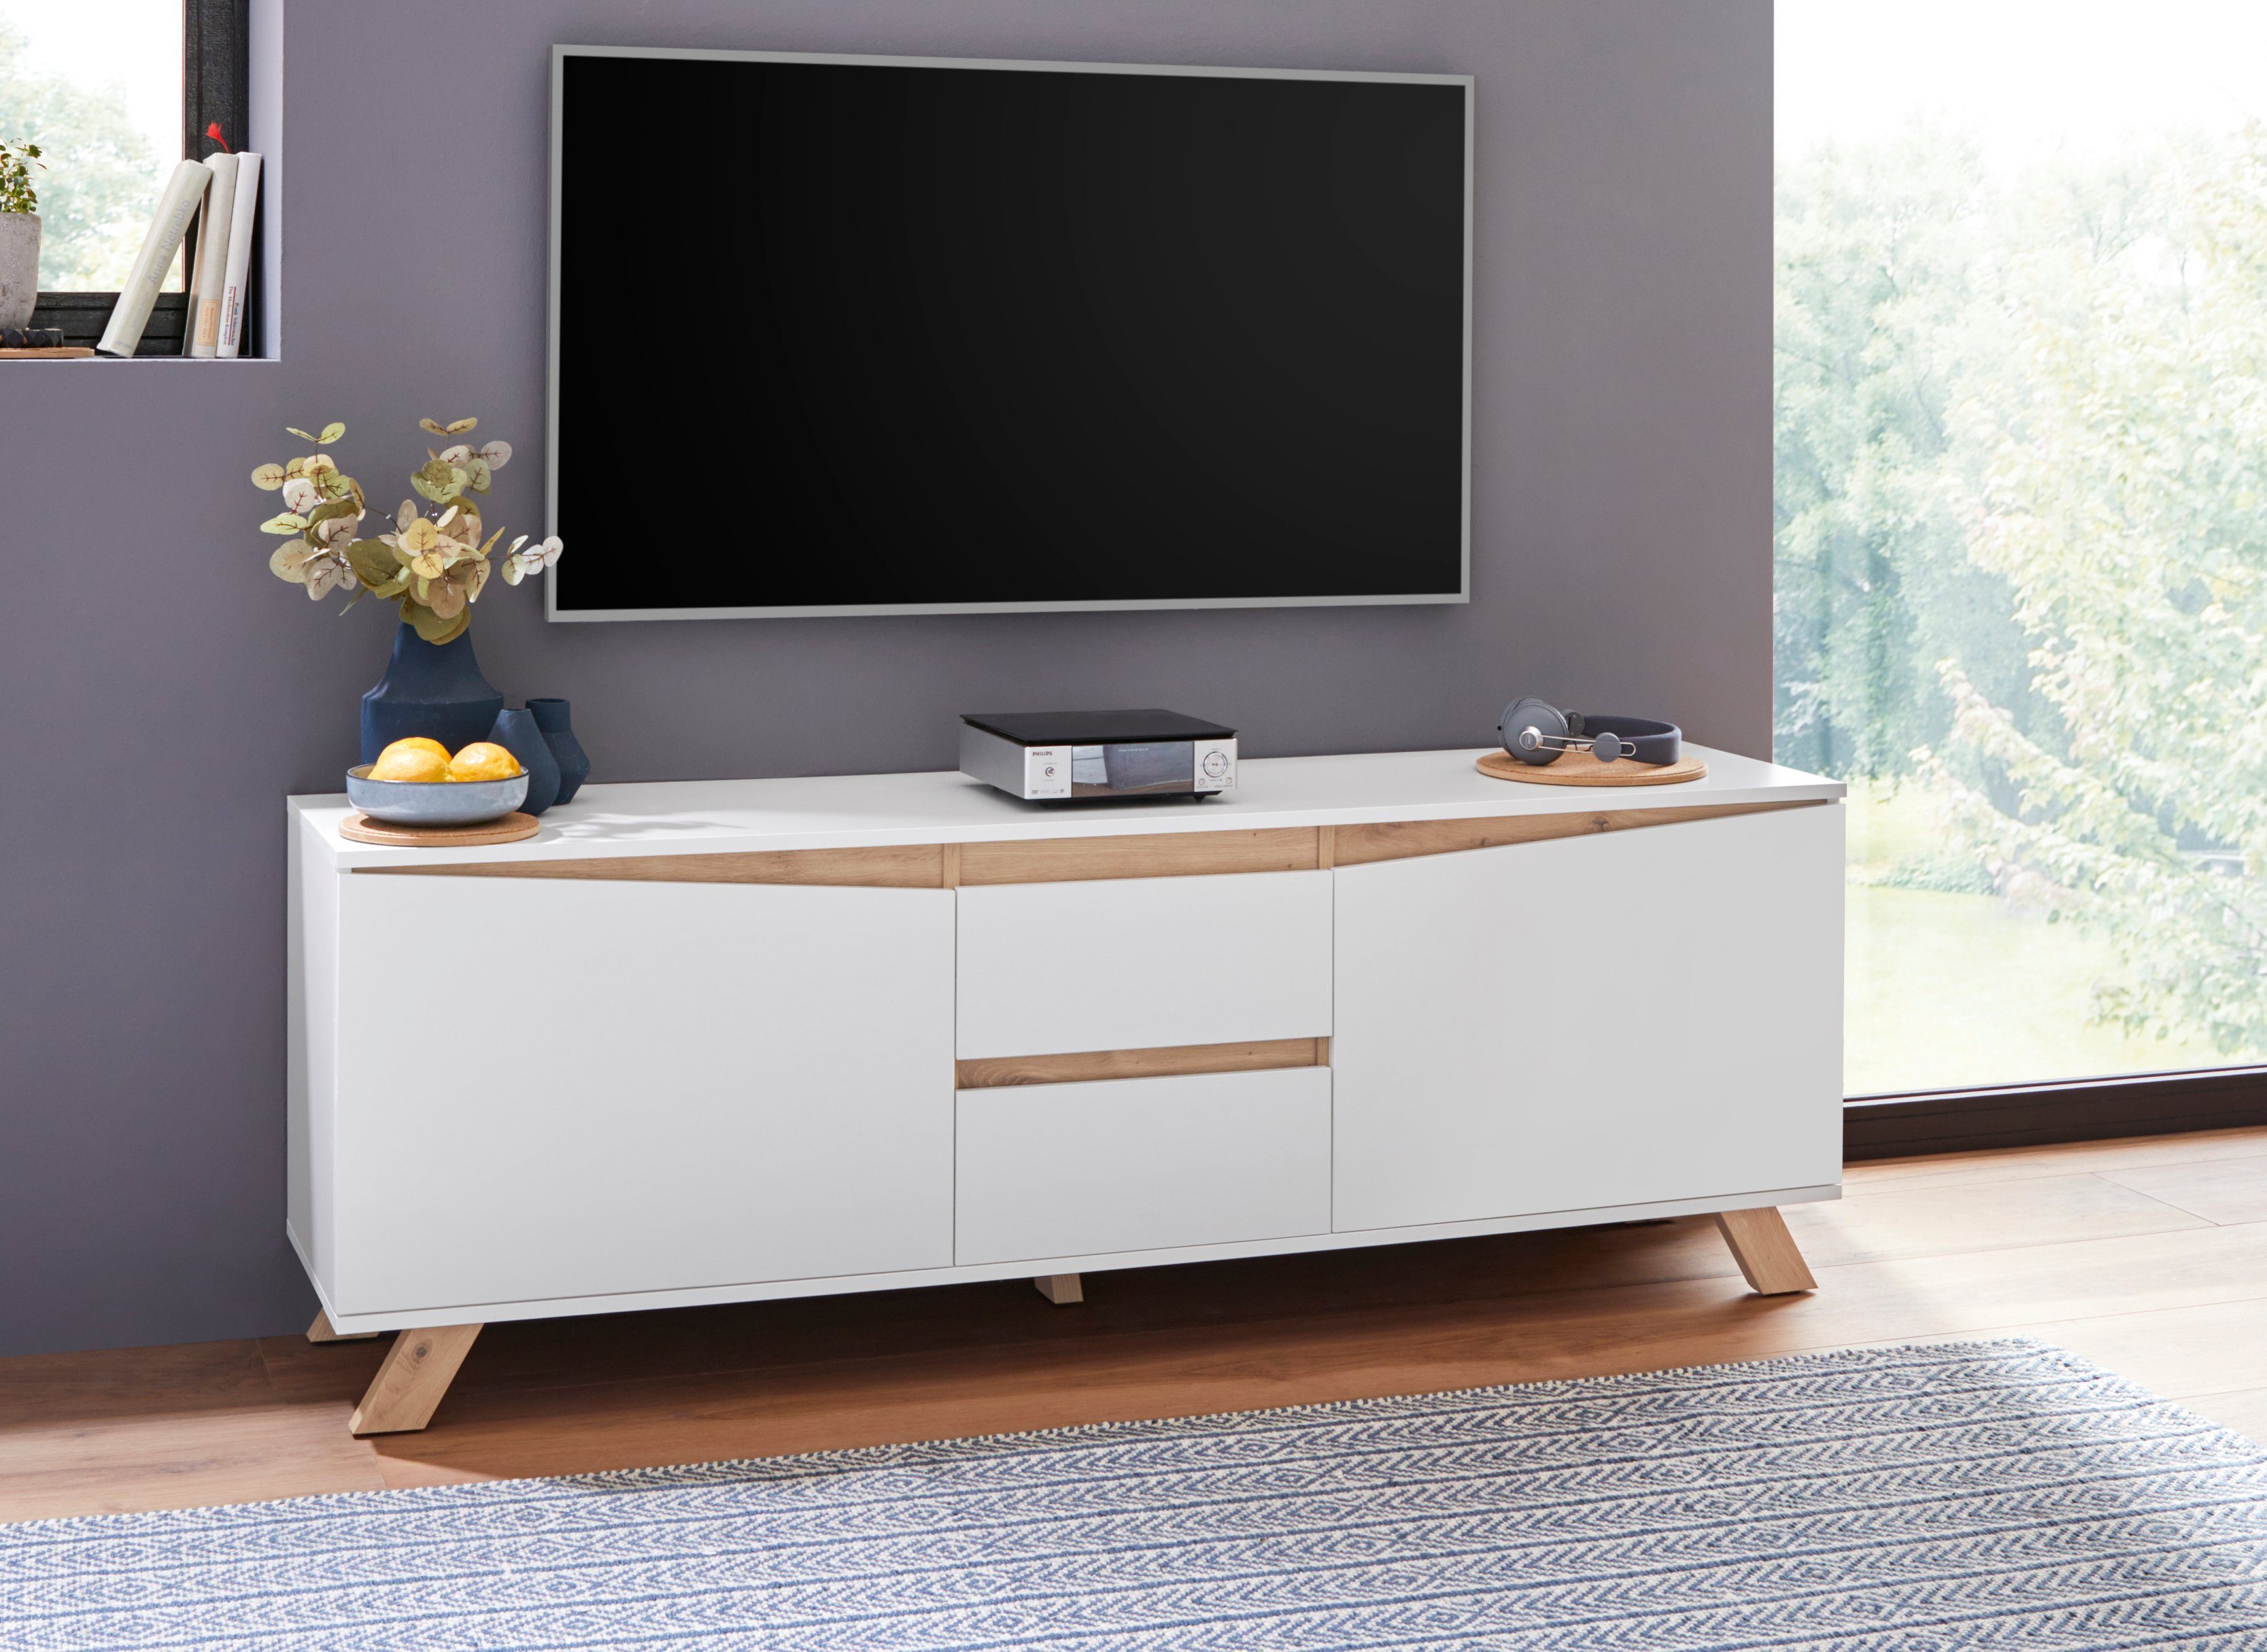 Homexperts Tv-meubel Vicky , breedte 160 cm, in mat-wit